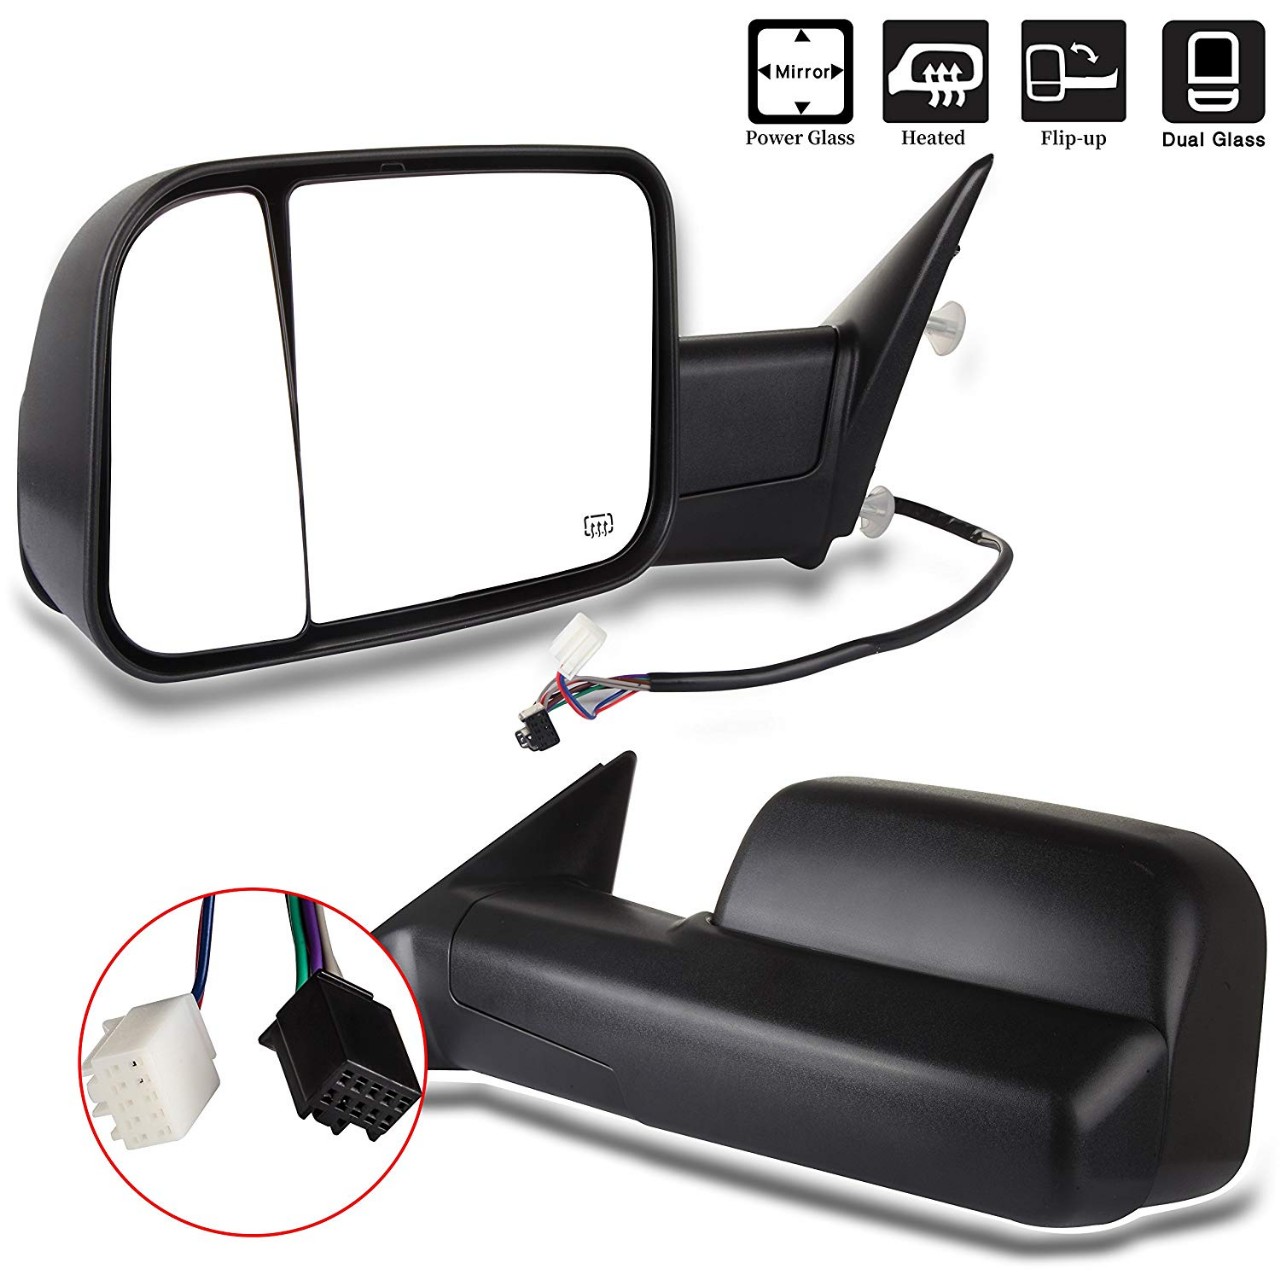 Dodge Ram Towing Mirrors High Perfitmance Automotive Exterior Mirrors fit 2009-2017 Ram 1500 2500 35